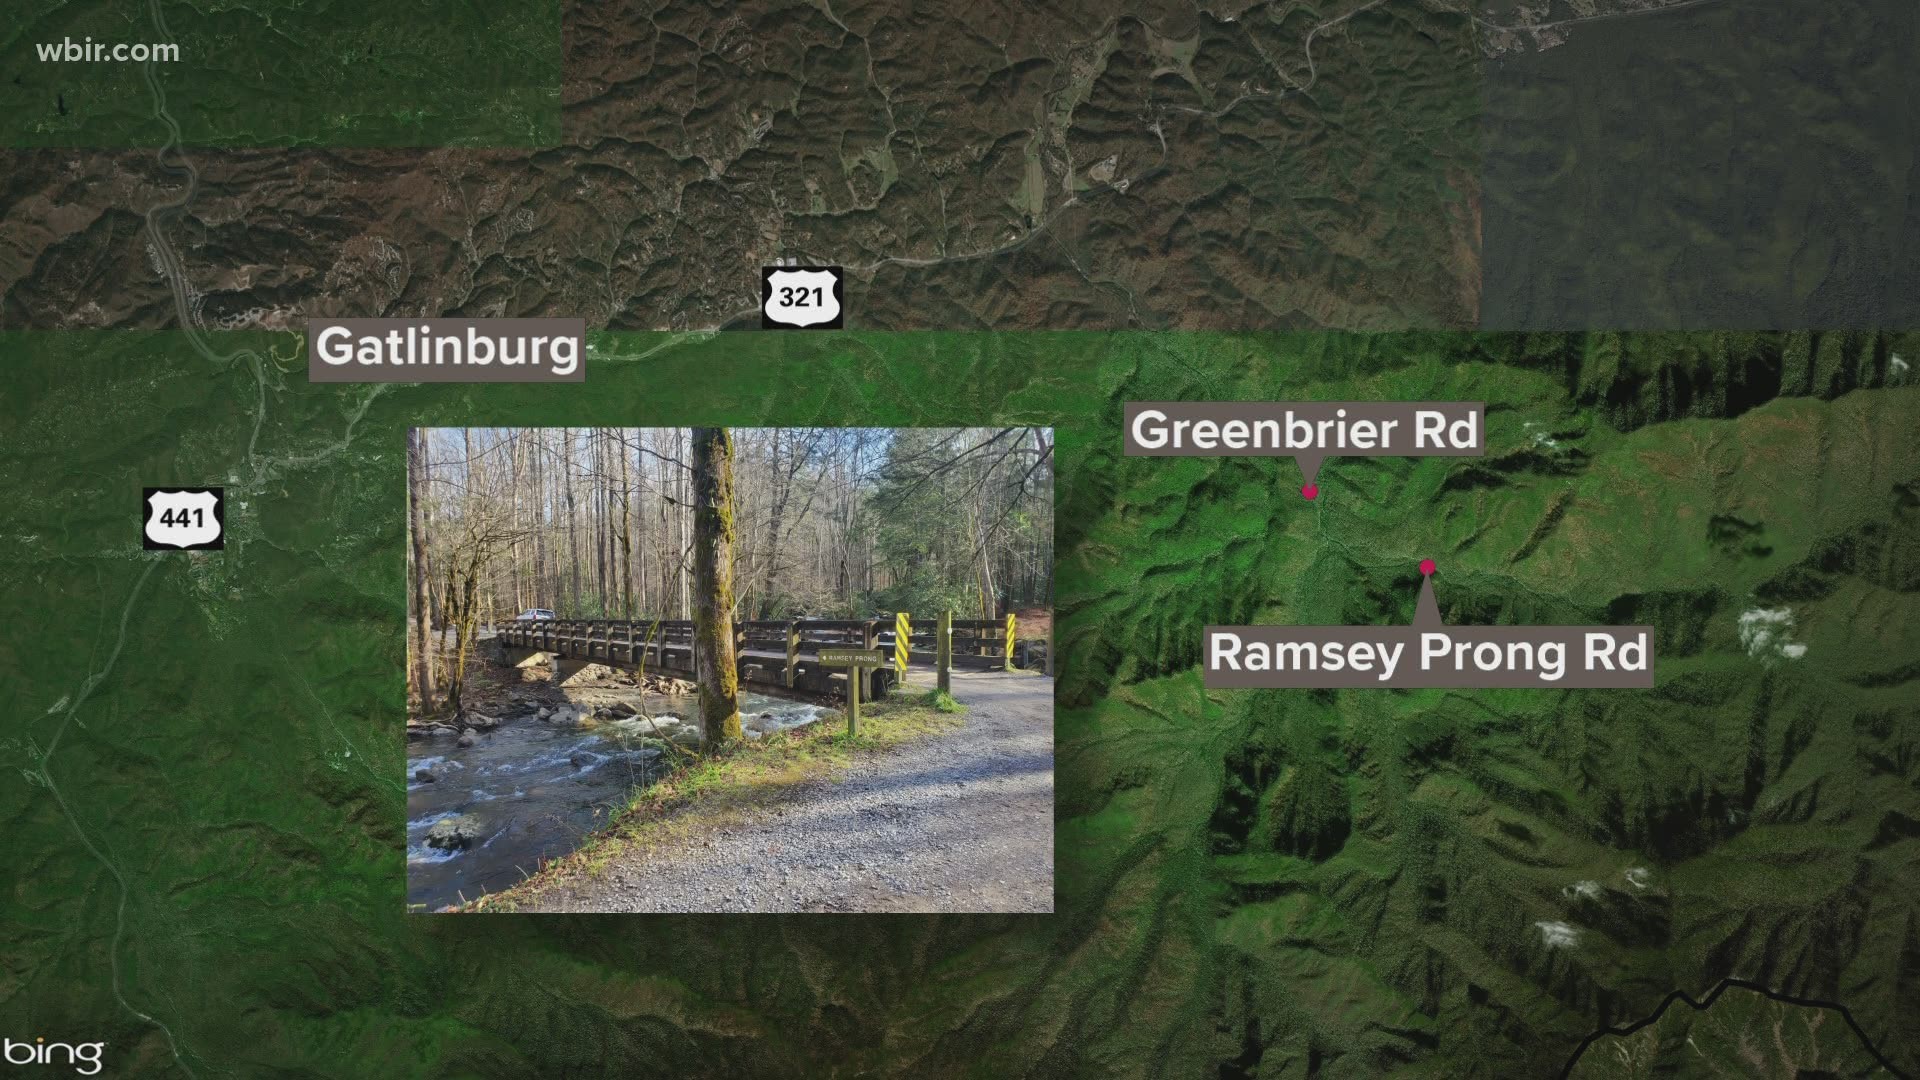 Two roads in the great smoky mountains national park will stay closed for a little longer.